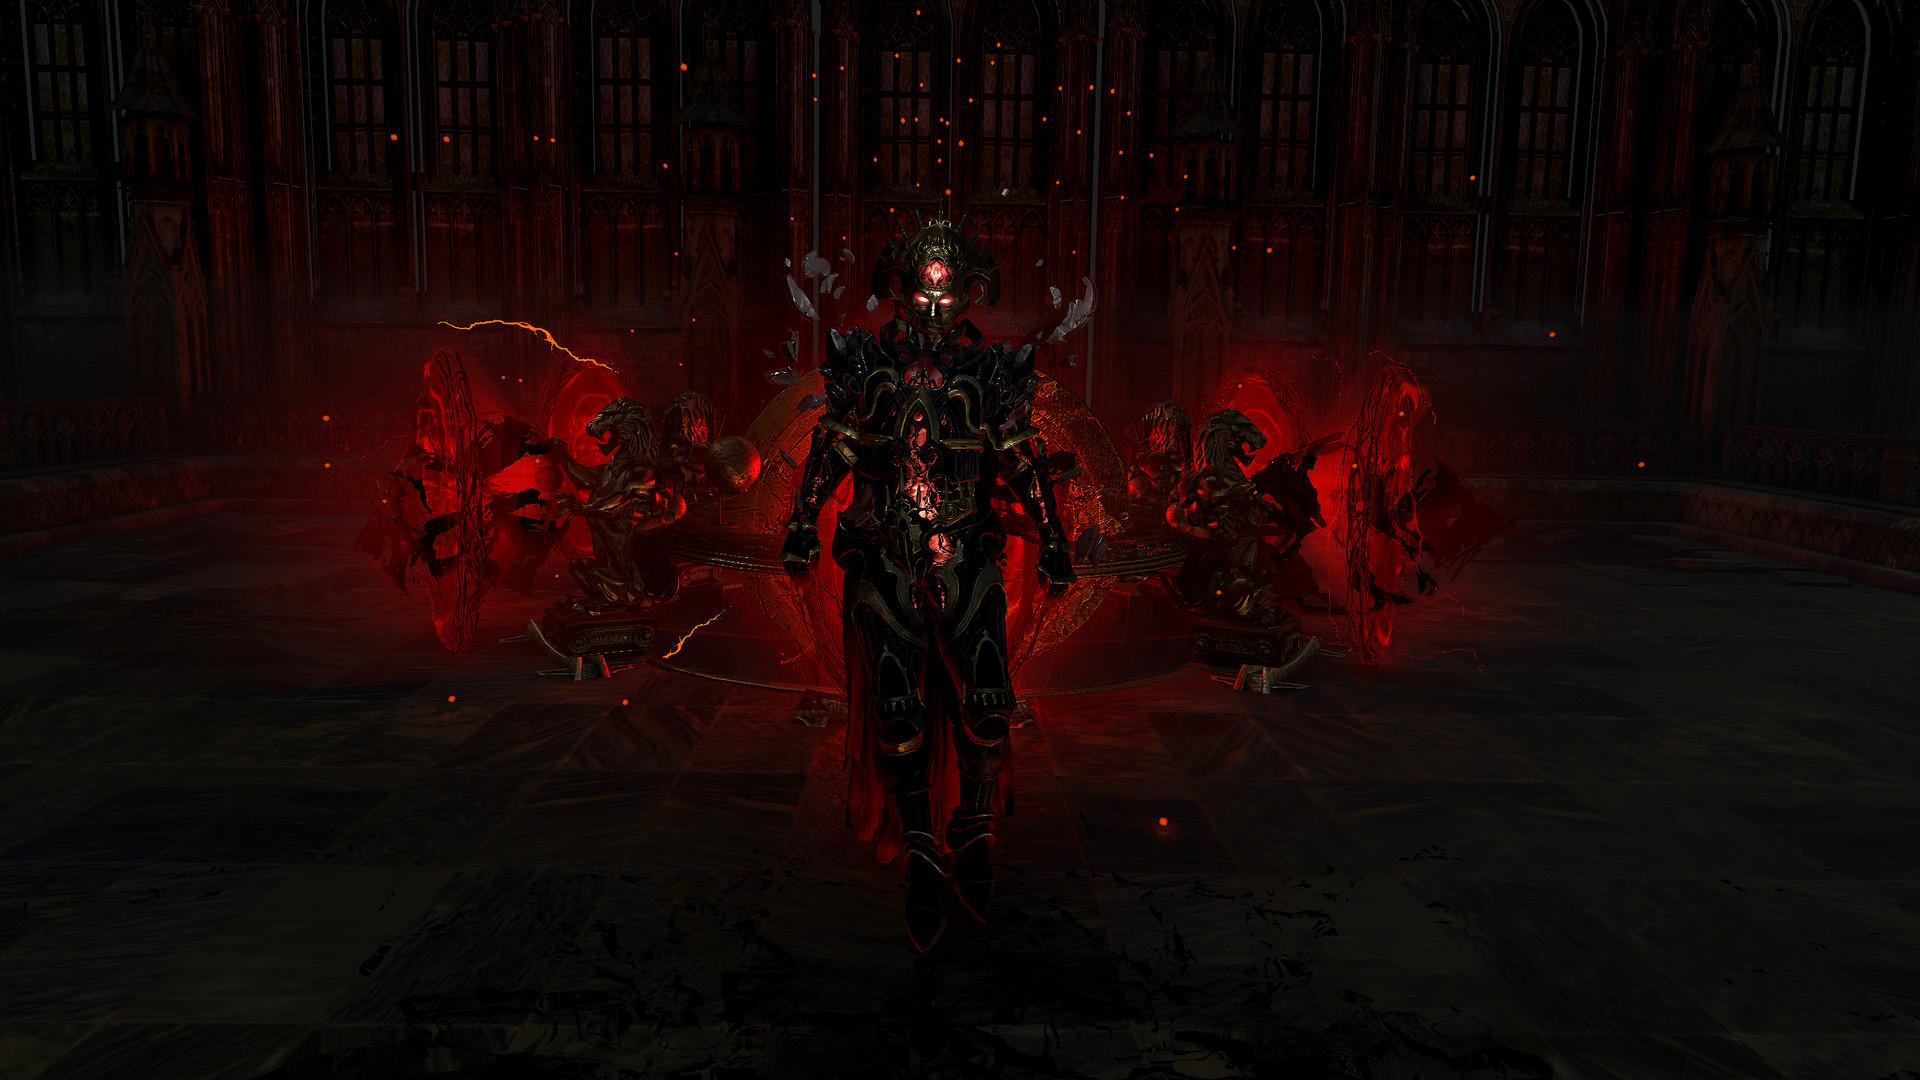 Screenshot №23 from game Path of Exile